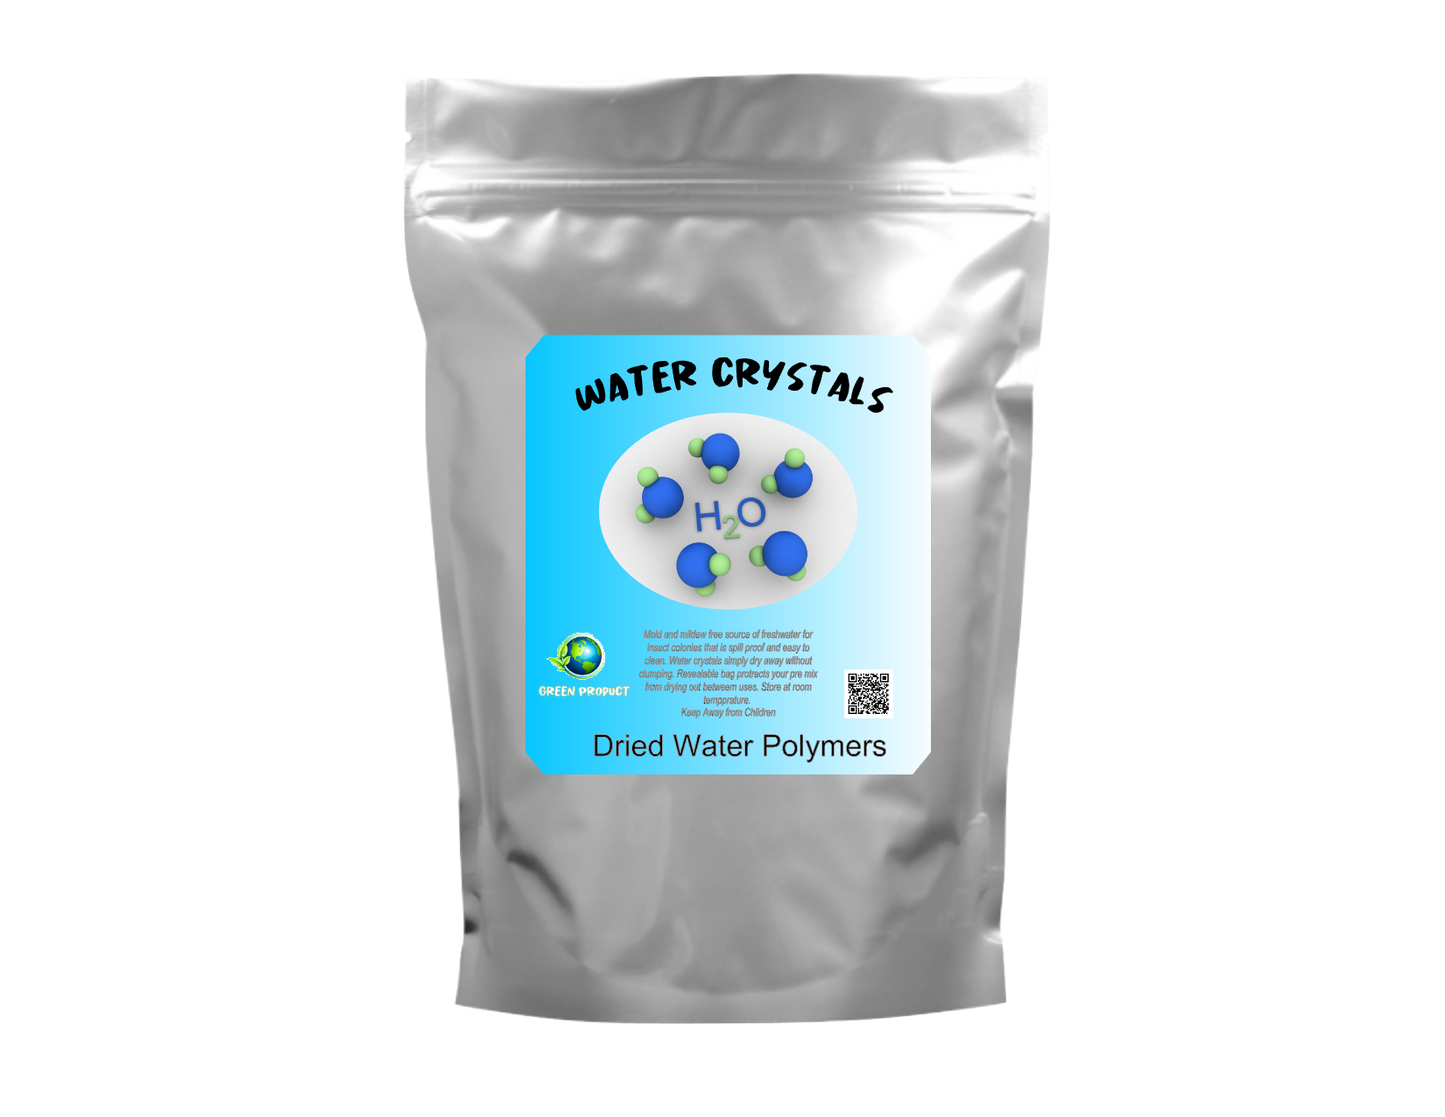 Dried Water Crystal Polymers